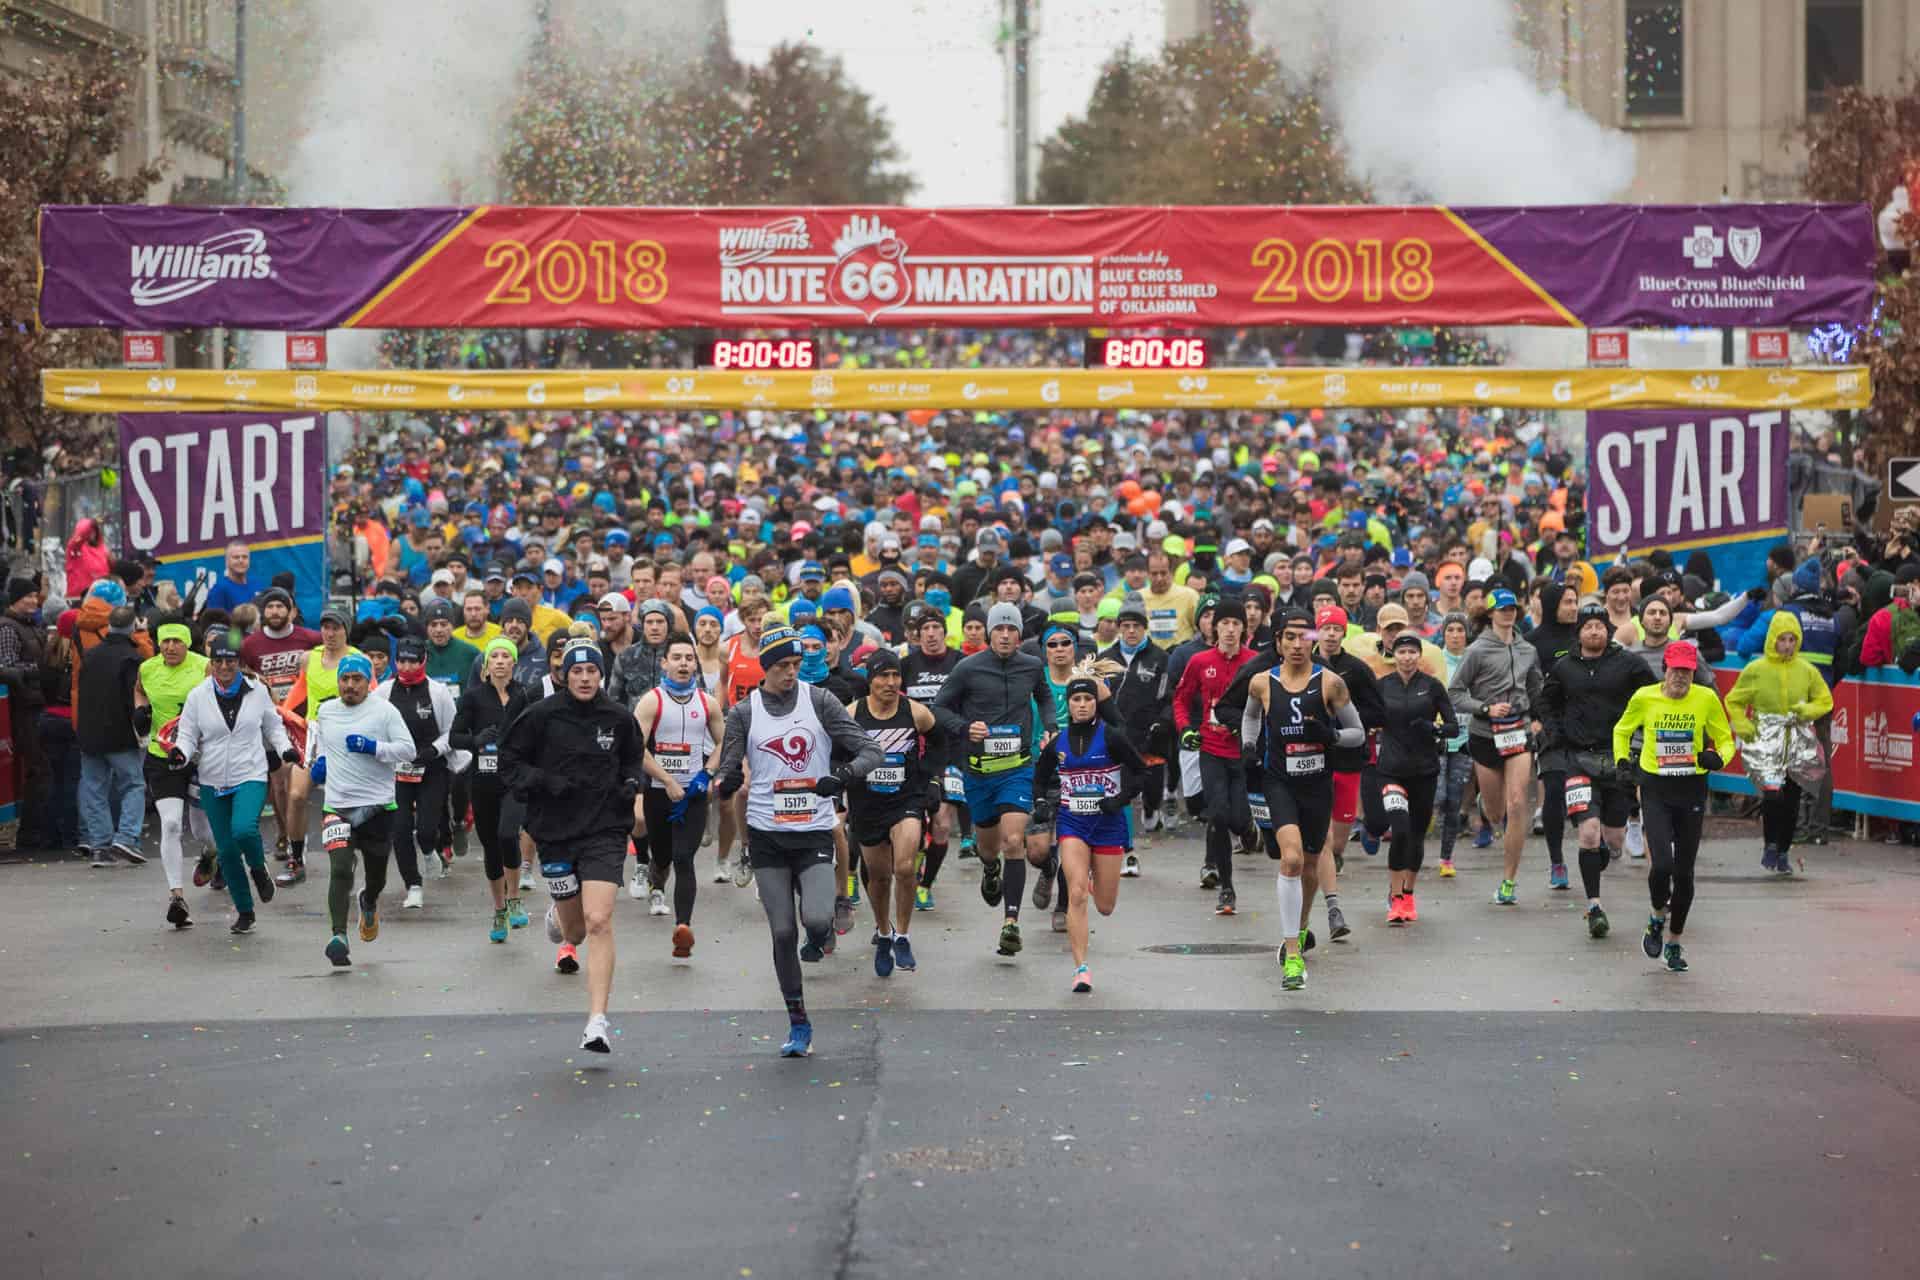 Where Is The Finish Line For Route 66 Half Marathon